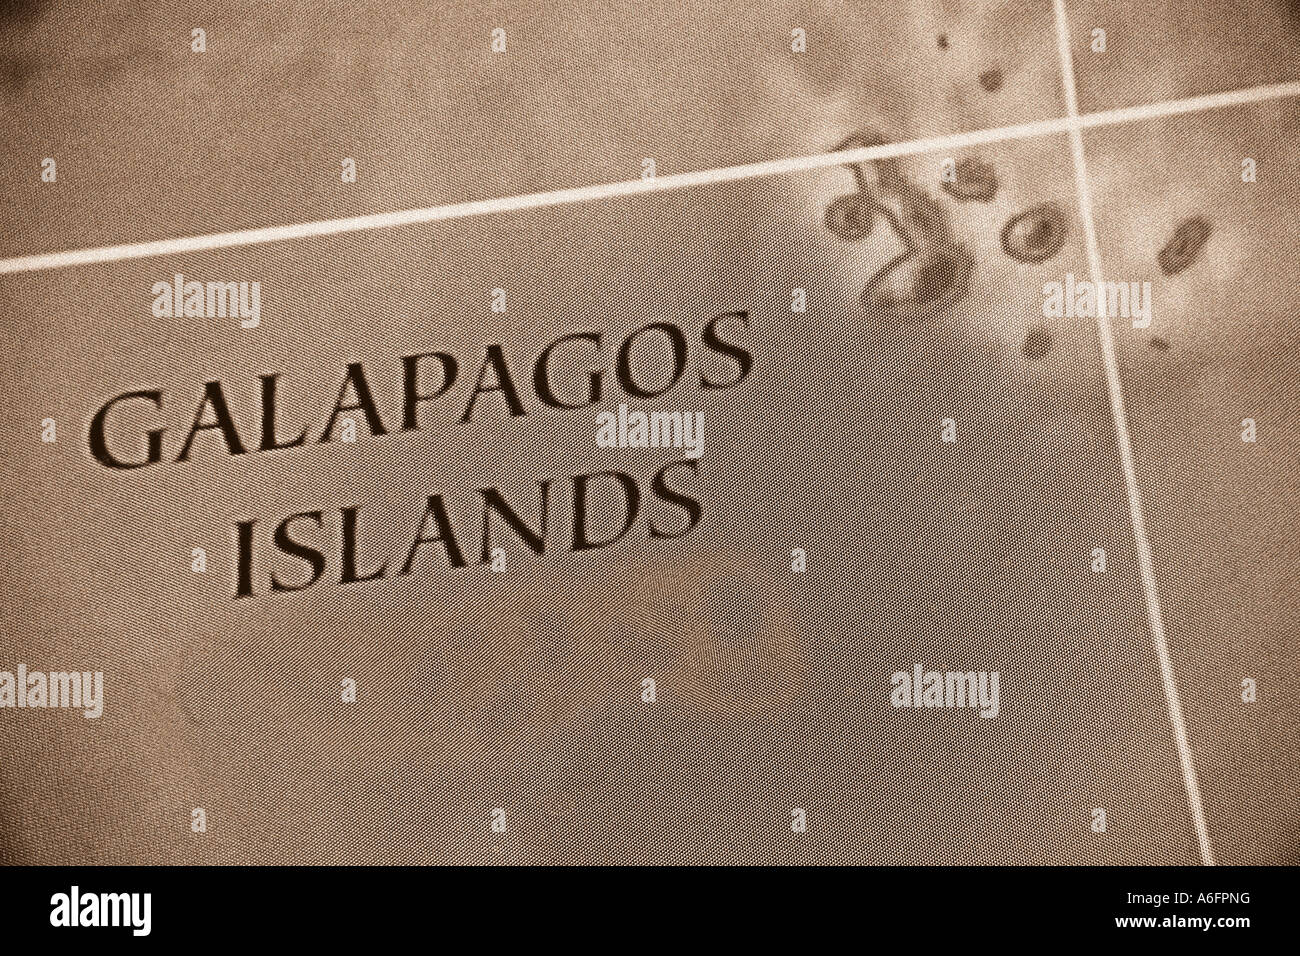 Mappa delle Isole Galapagos Foto Stock